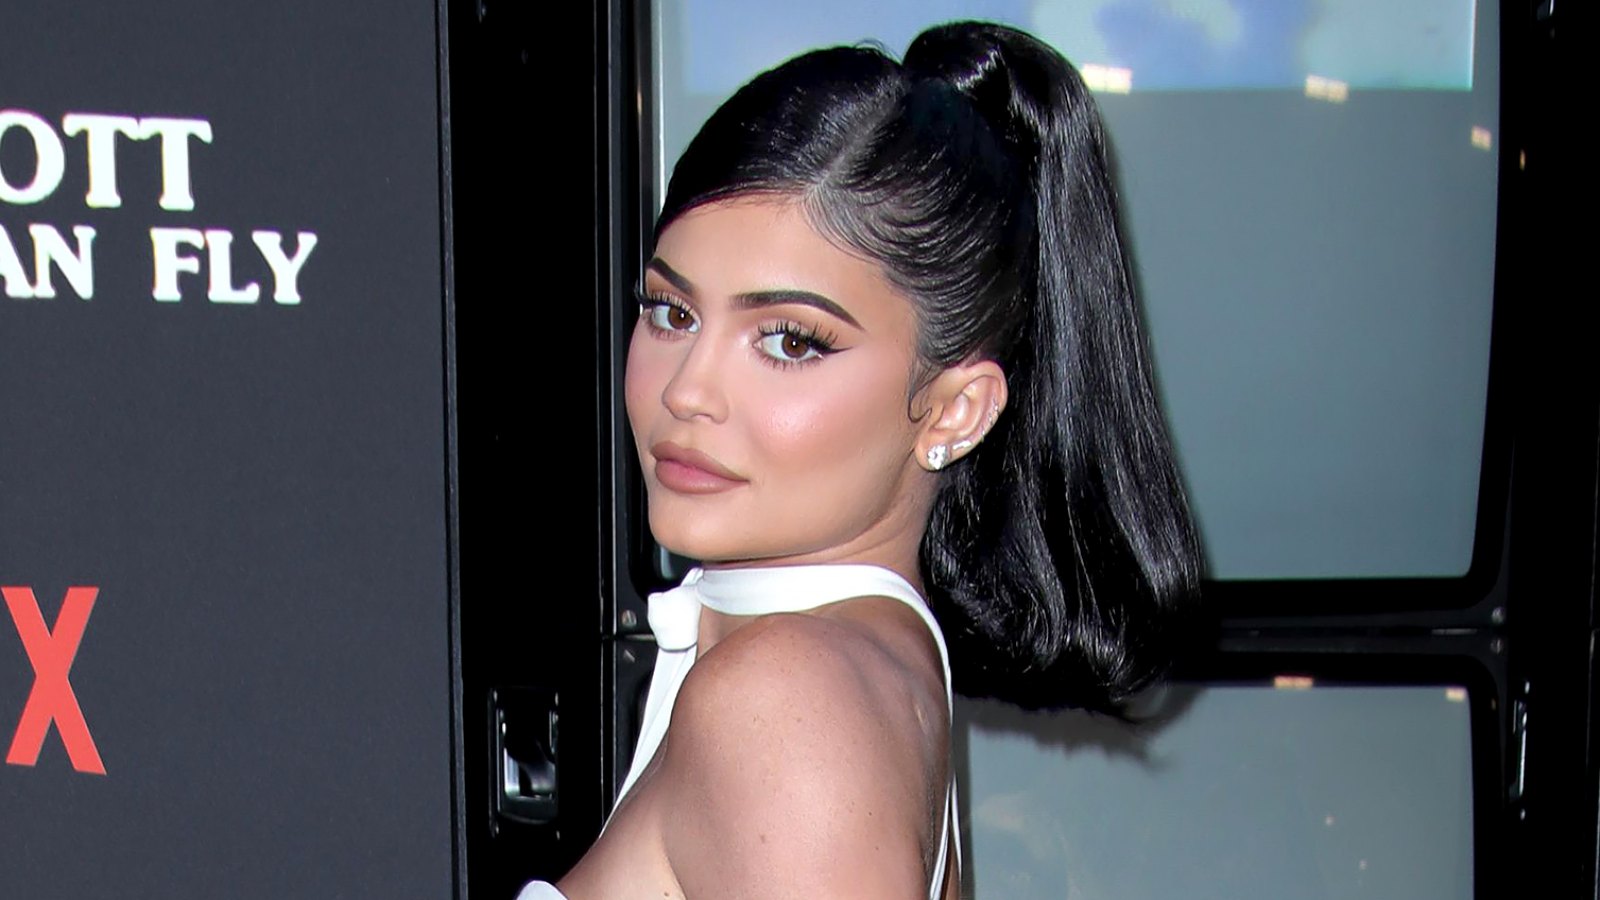 Kylie Jenner Shares What’s in Her Bag, Revealing Stormi’s Rolex and a New Kylie Cosmetics Product Feature